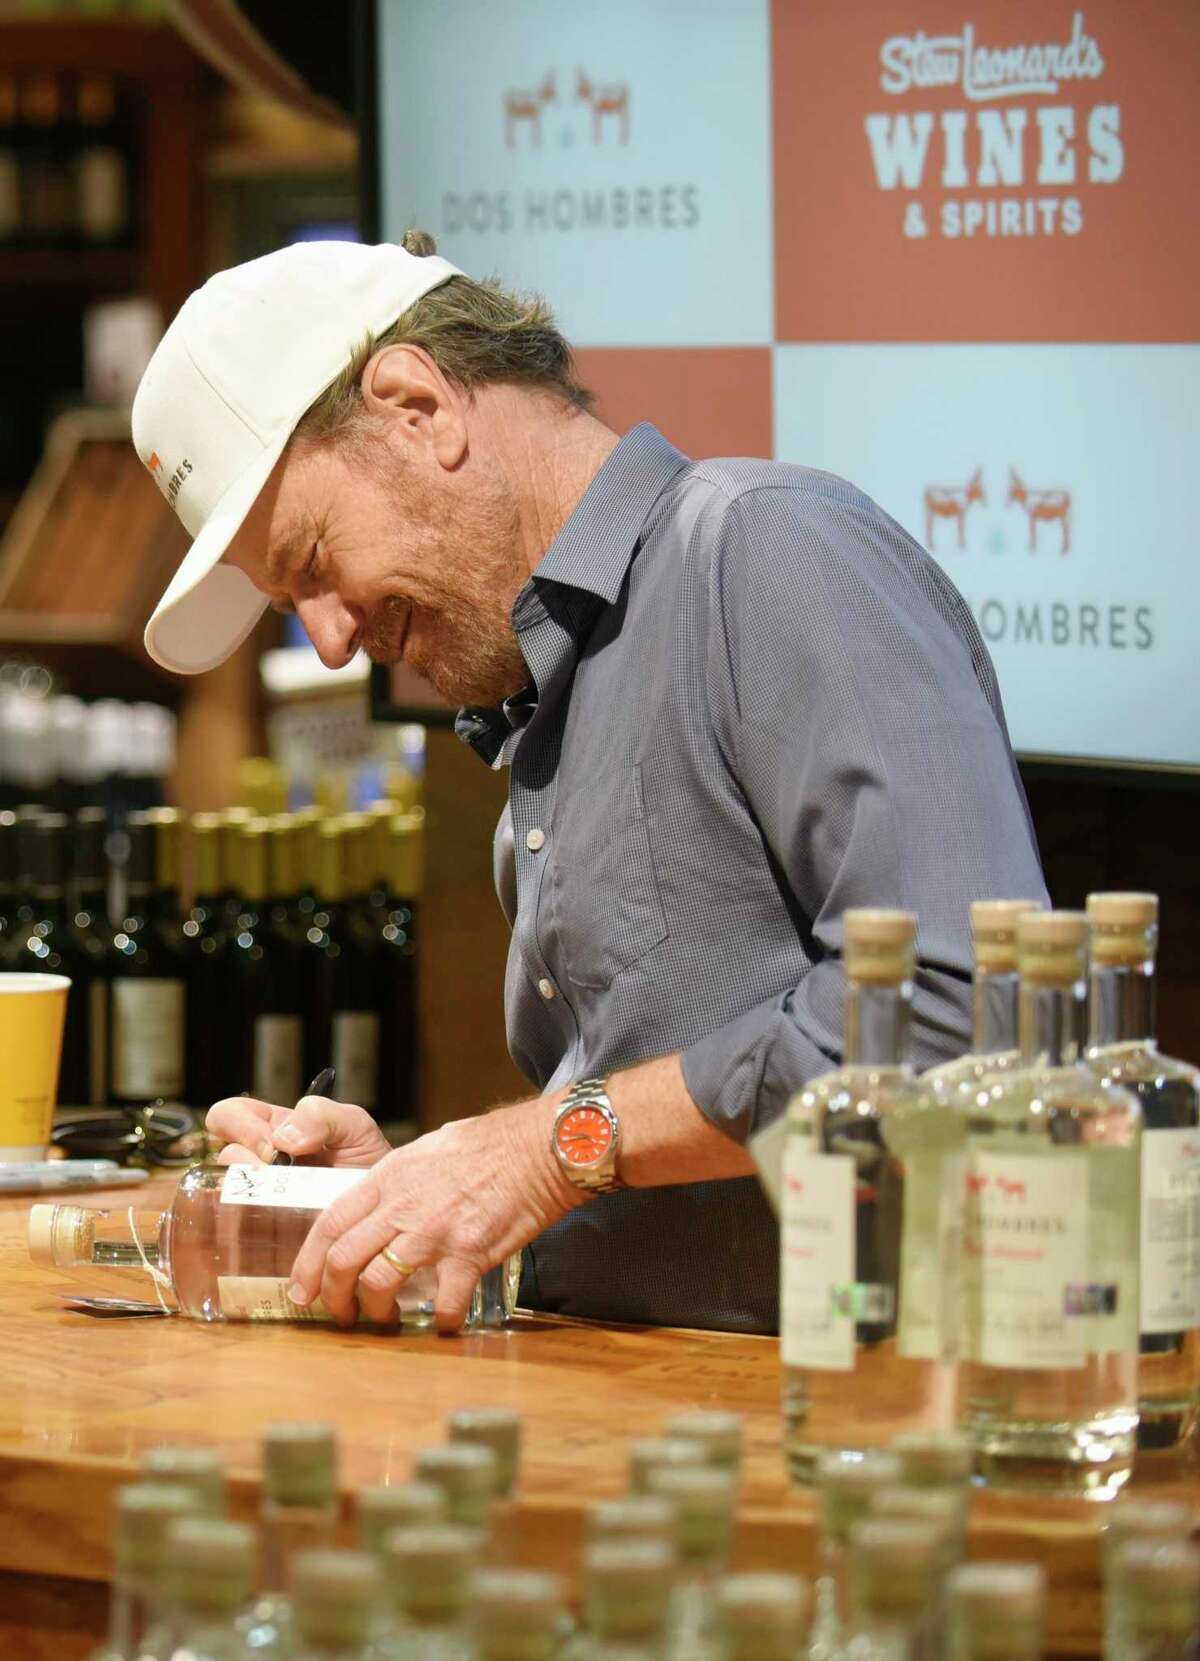 In photos: Bryan Cranston brings his new tequila to Stew Leonard's